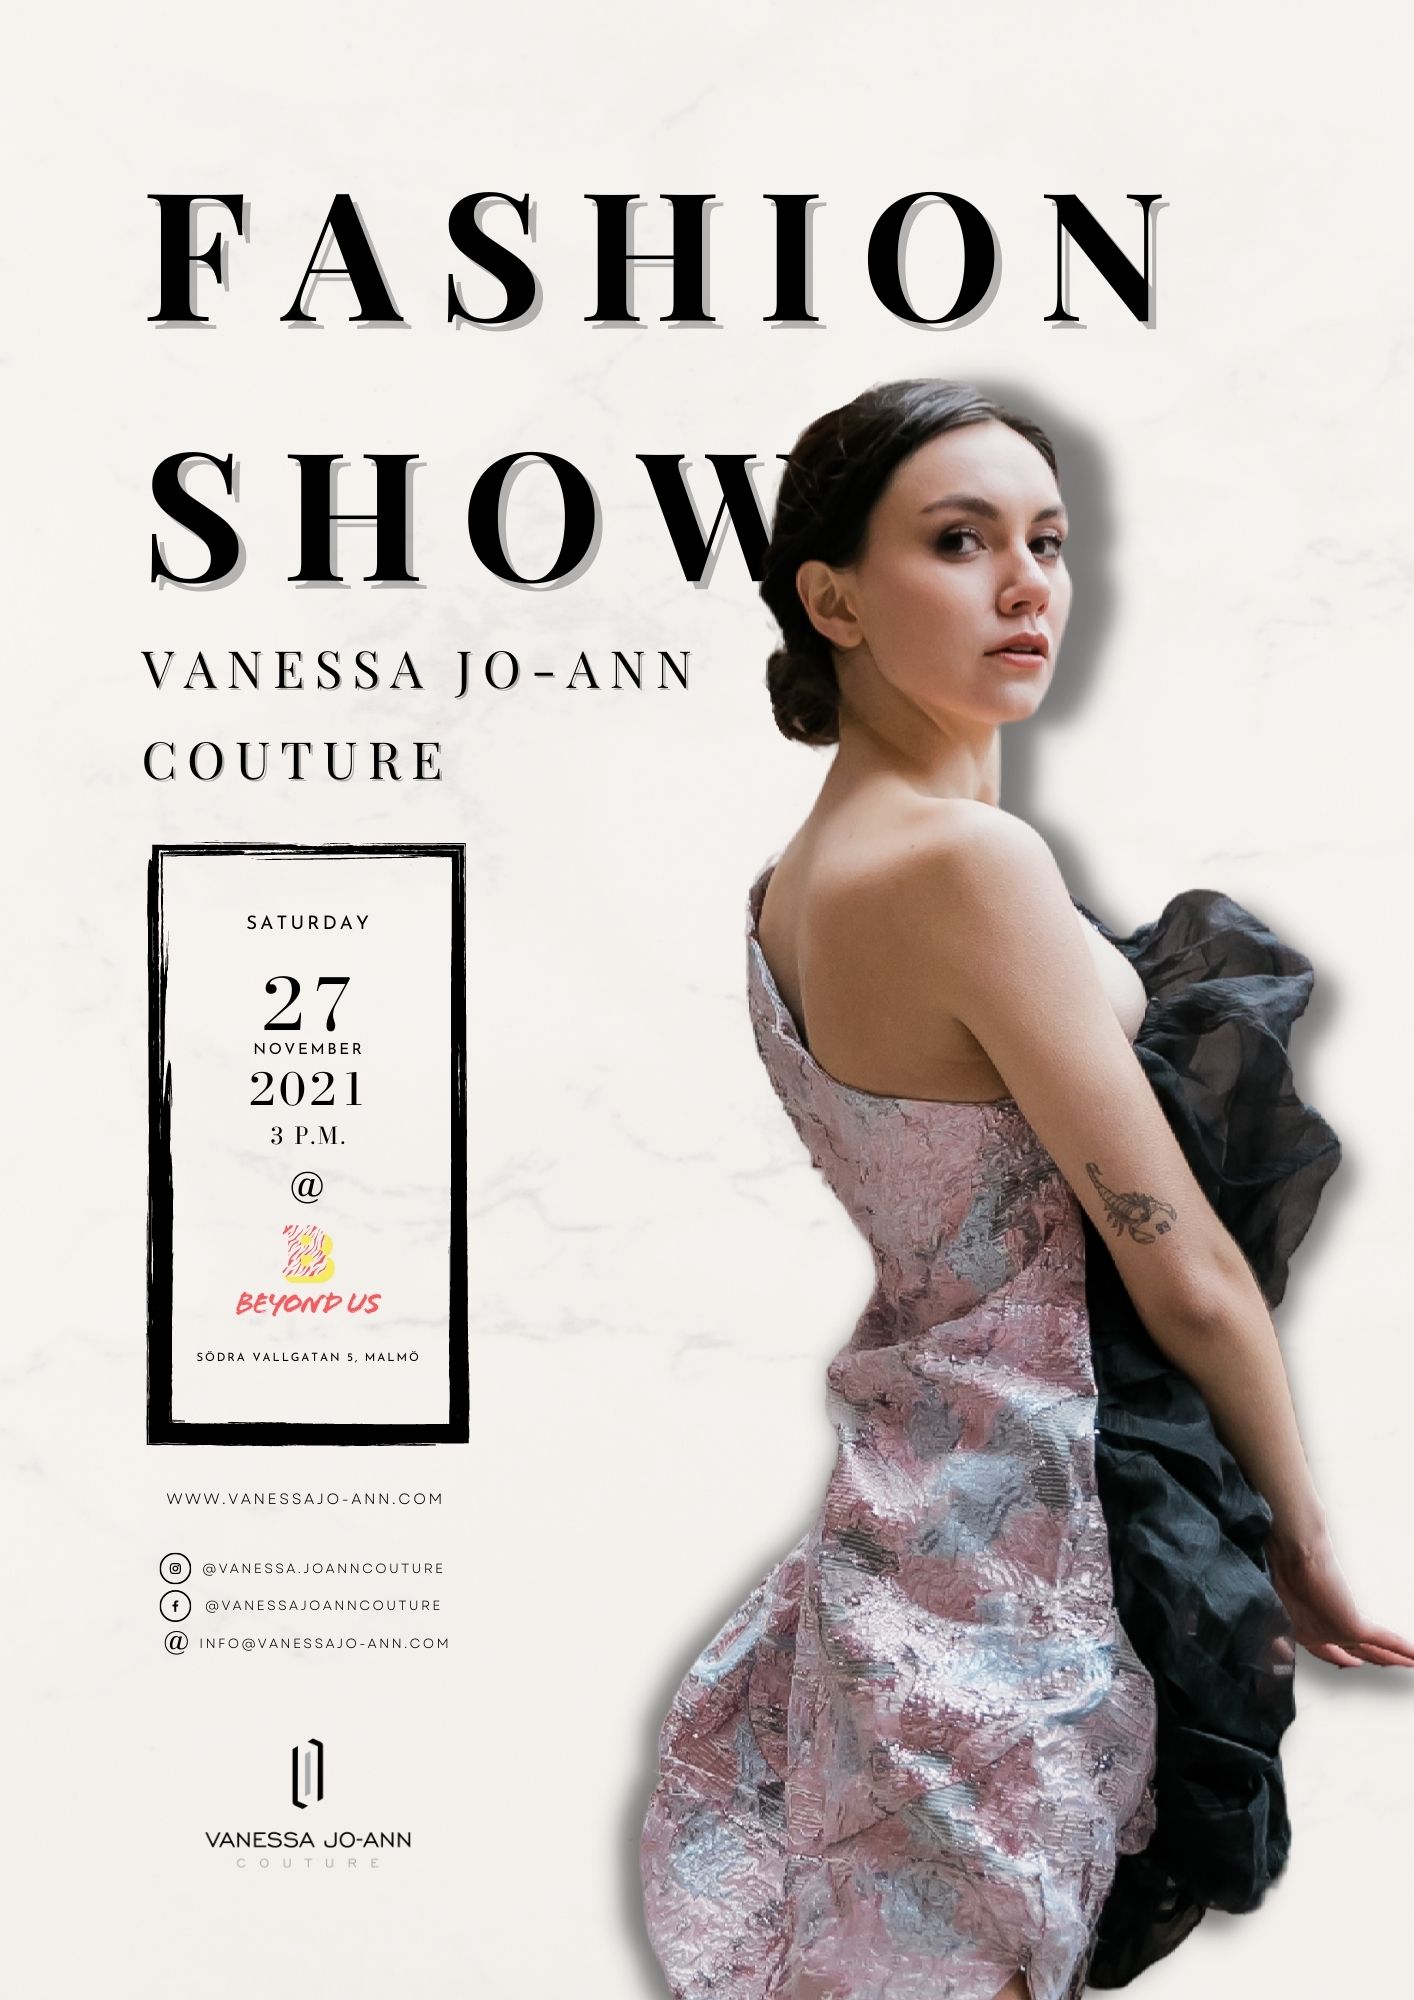 Vanessa Jo-Ann Couture is holding a fashion show in Malmö!